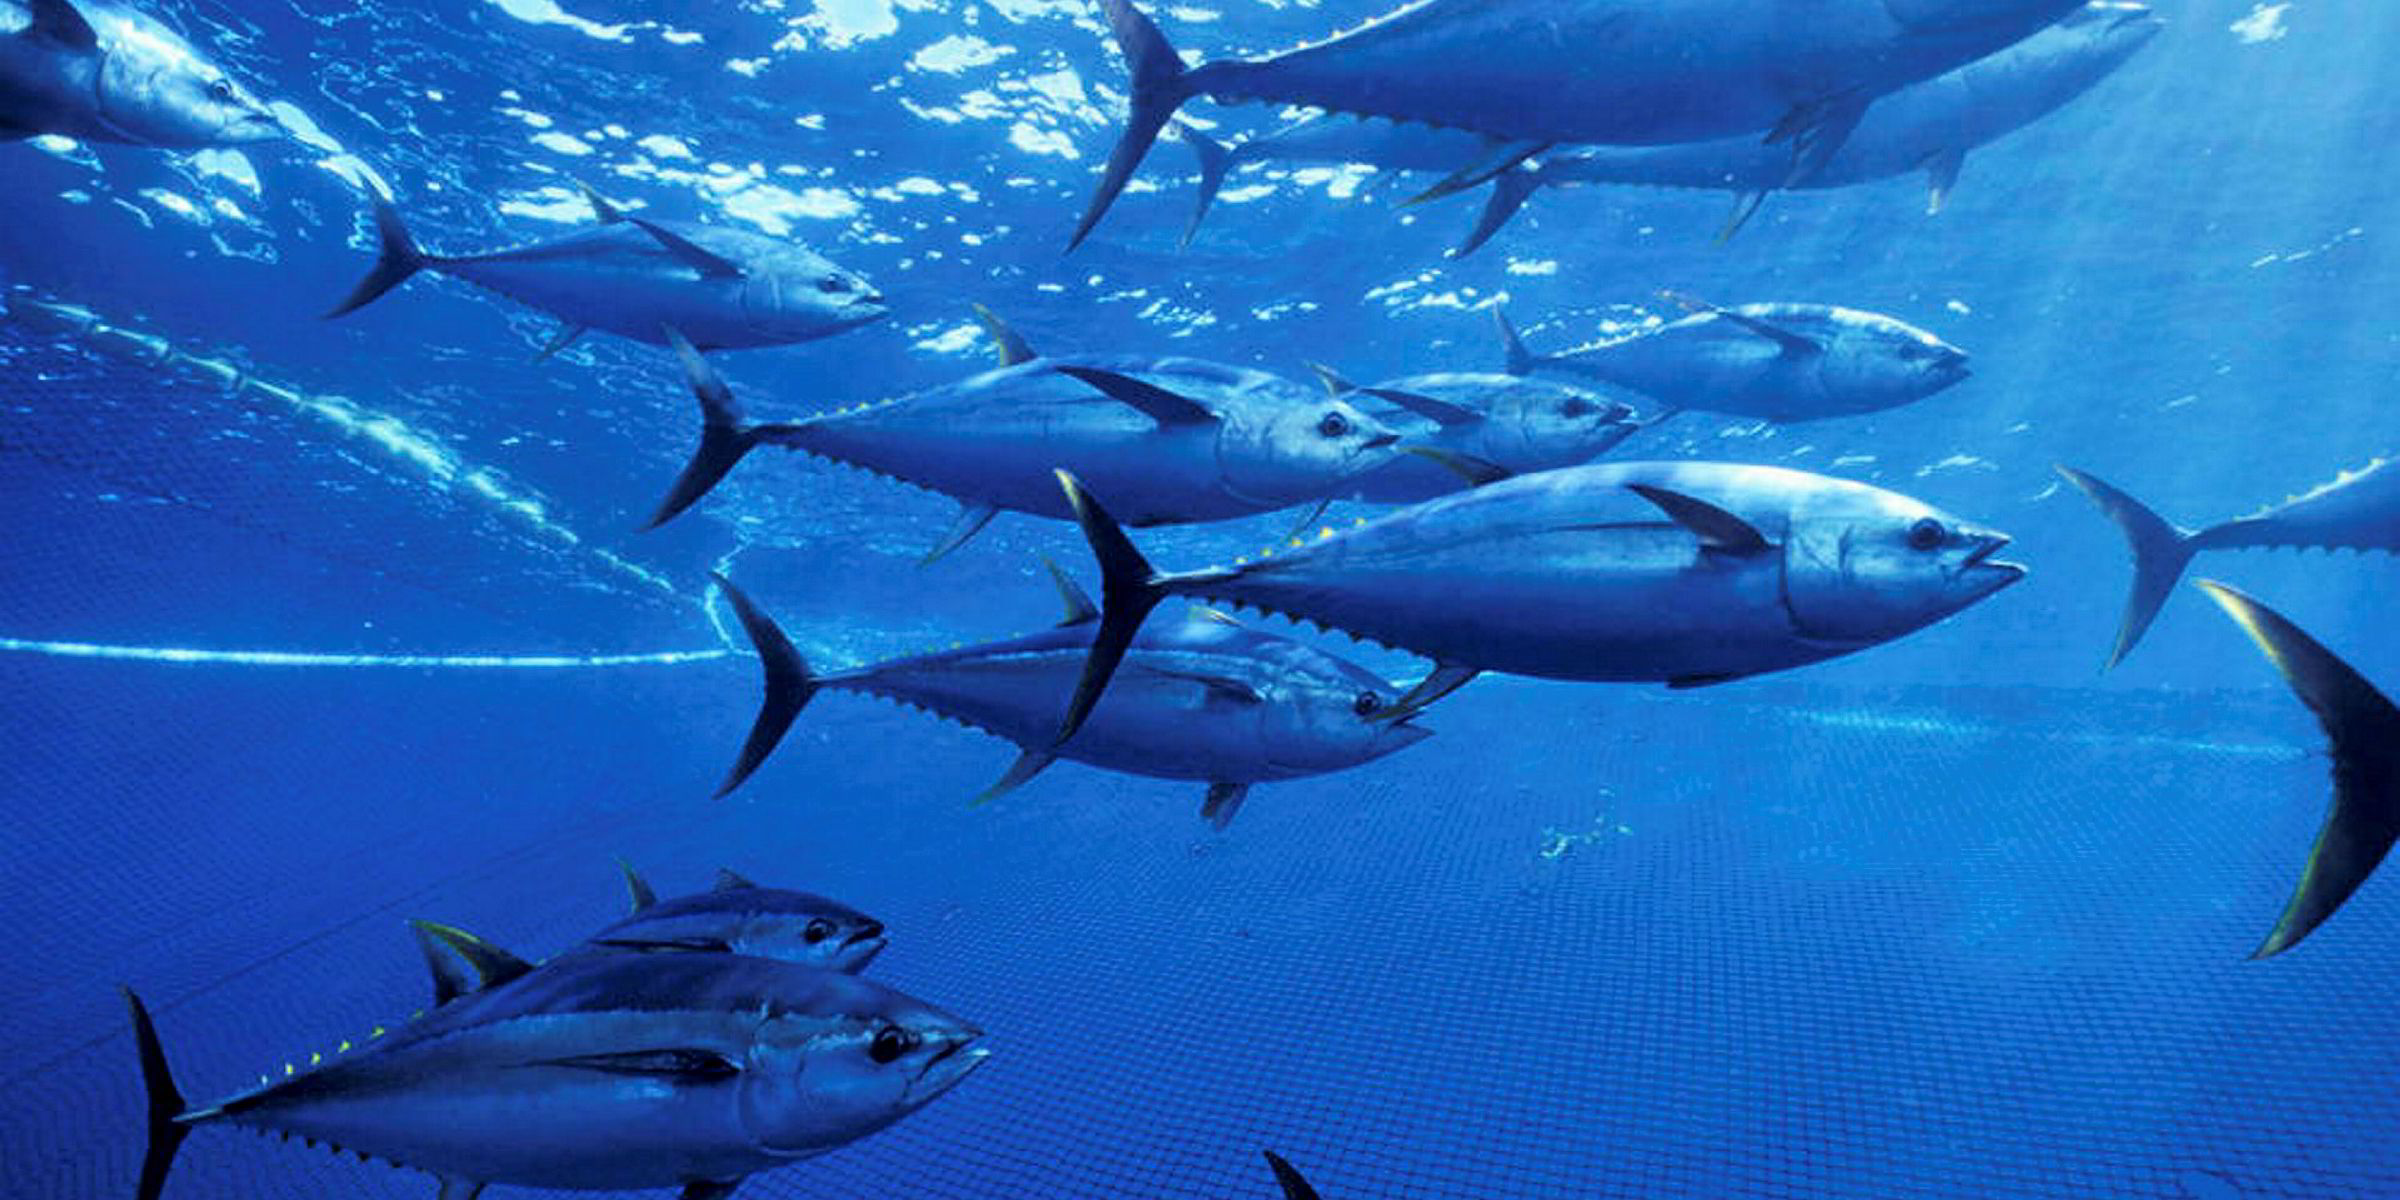 Member countries vote to cut yellowfin tuna catch by 15% Intrafish